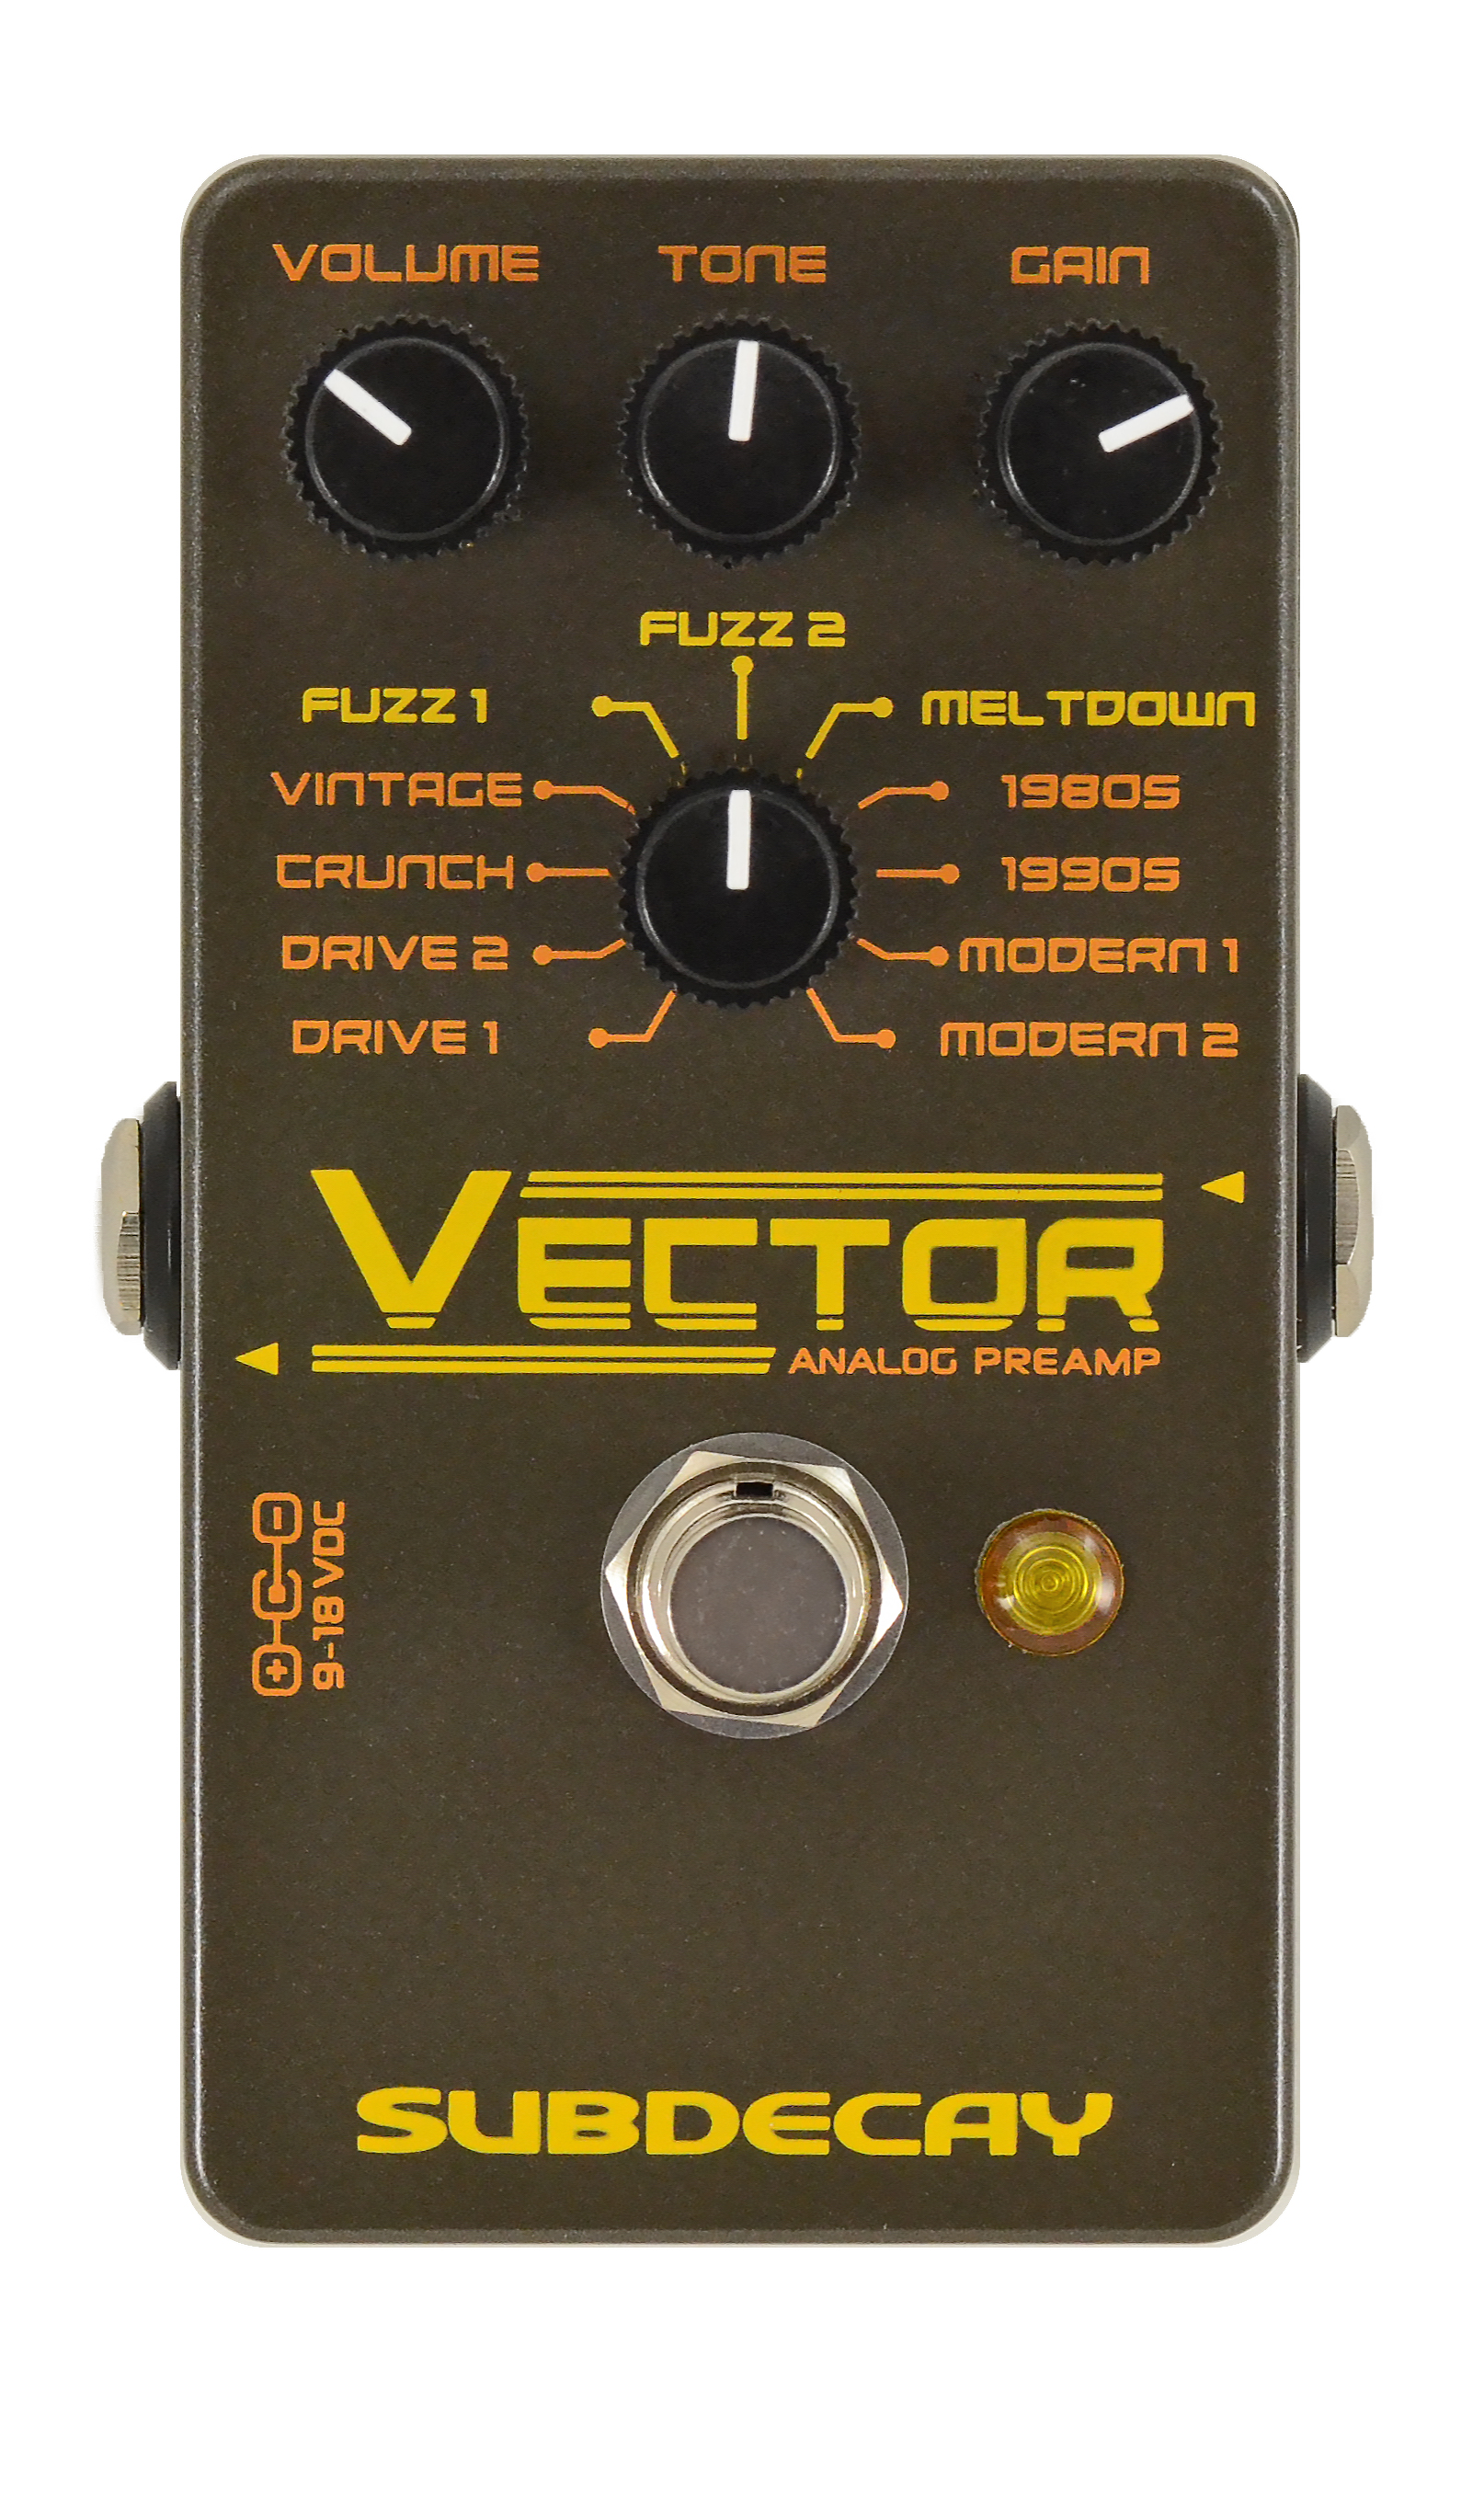 Subdecay launches the Vector Preamp. - Guitar Effects - Subdecay